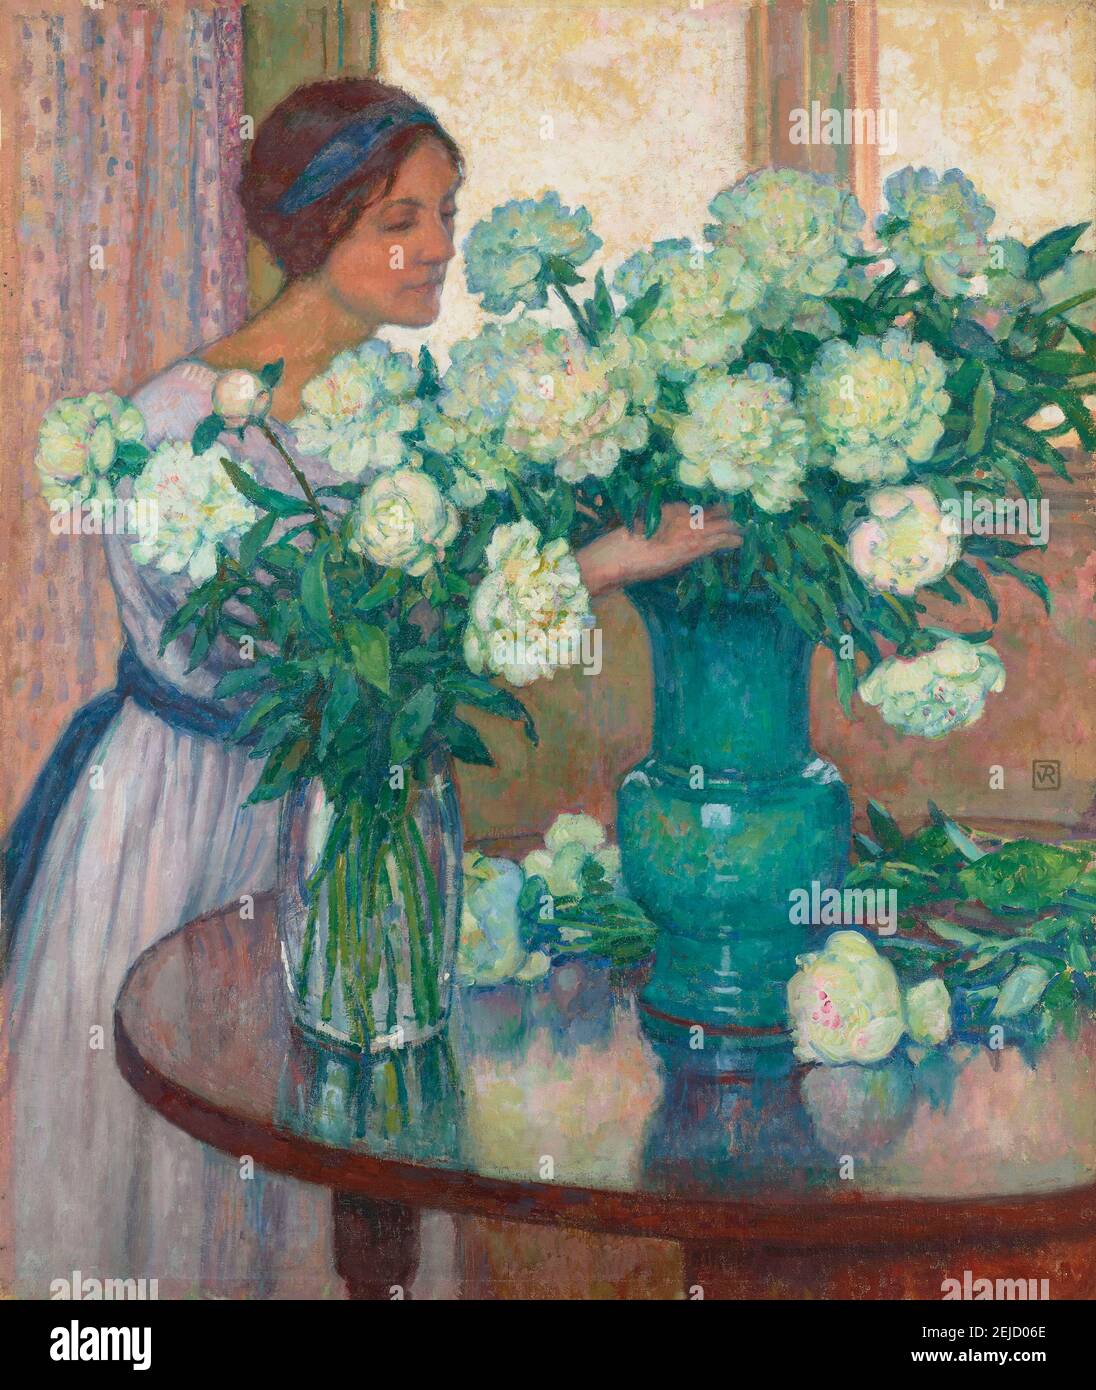 Les Pivoines blanches (White peonies). Museum: PRIVATE COLLECTION. Author: THEO VAN RYSSELBERGHE. Stock Photo